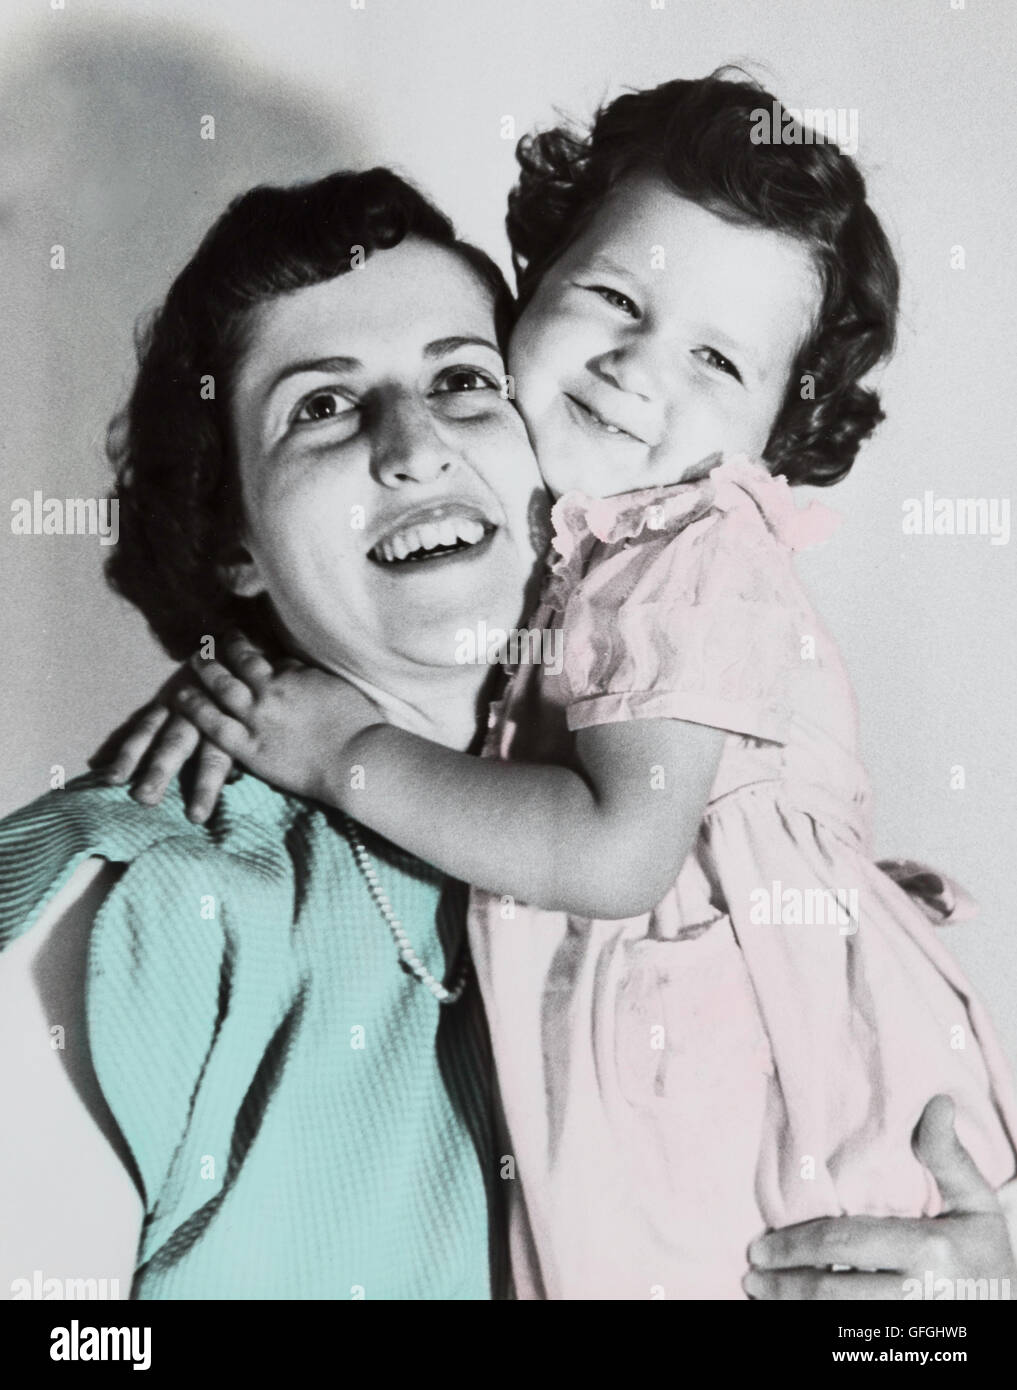 Vintage 1950's Hand-colored Portrait of Mother and Daughter Smiling at Camera, USA Stock Photo